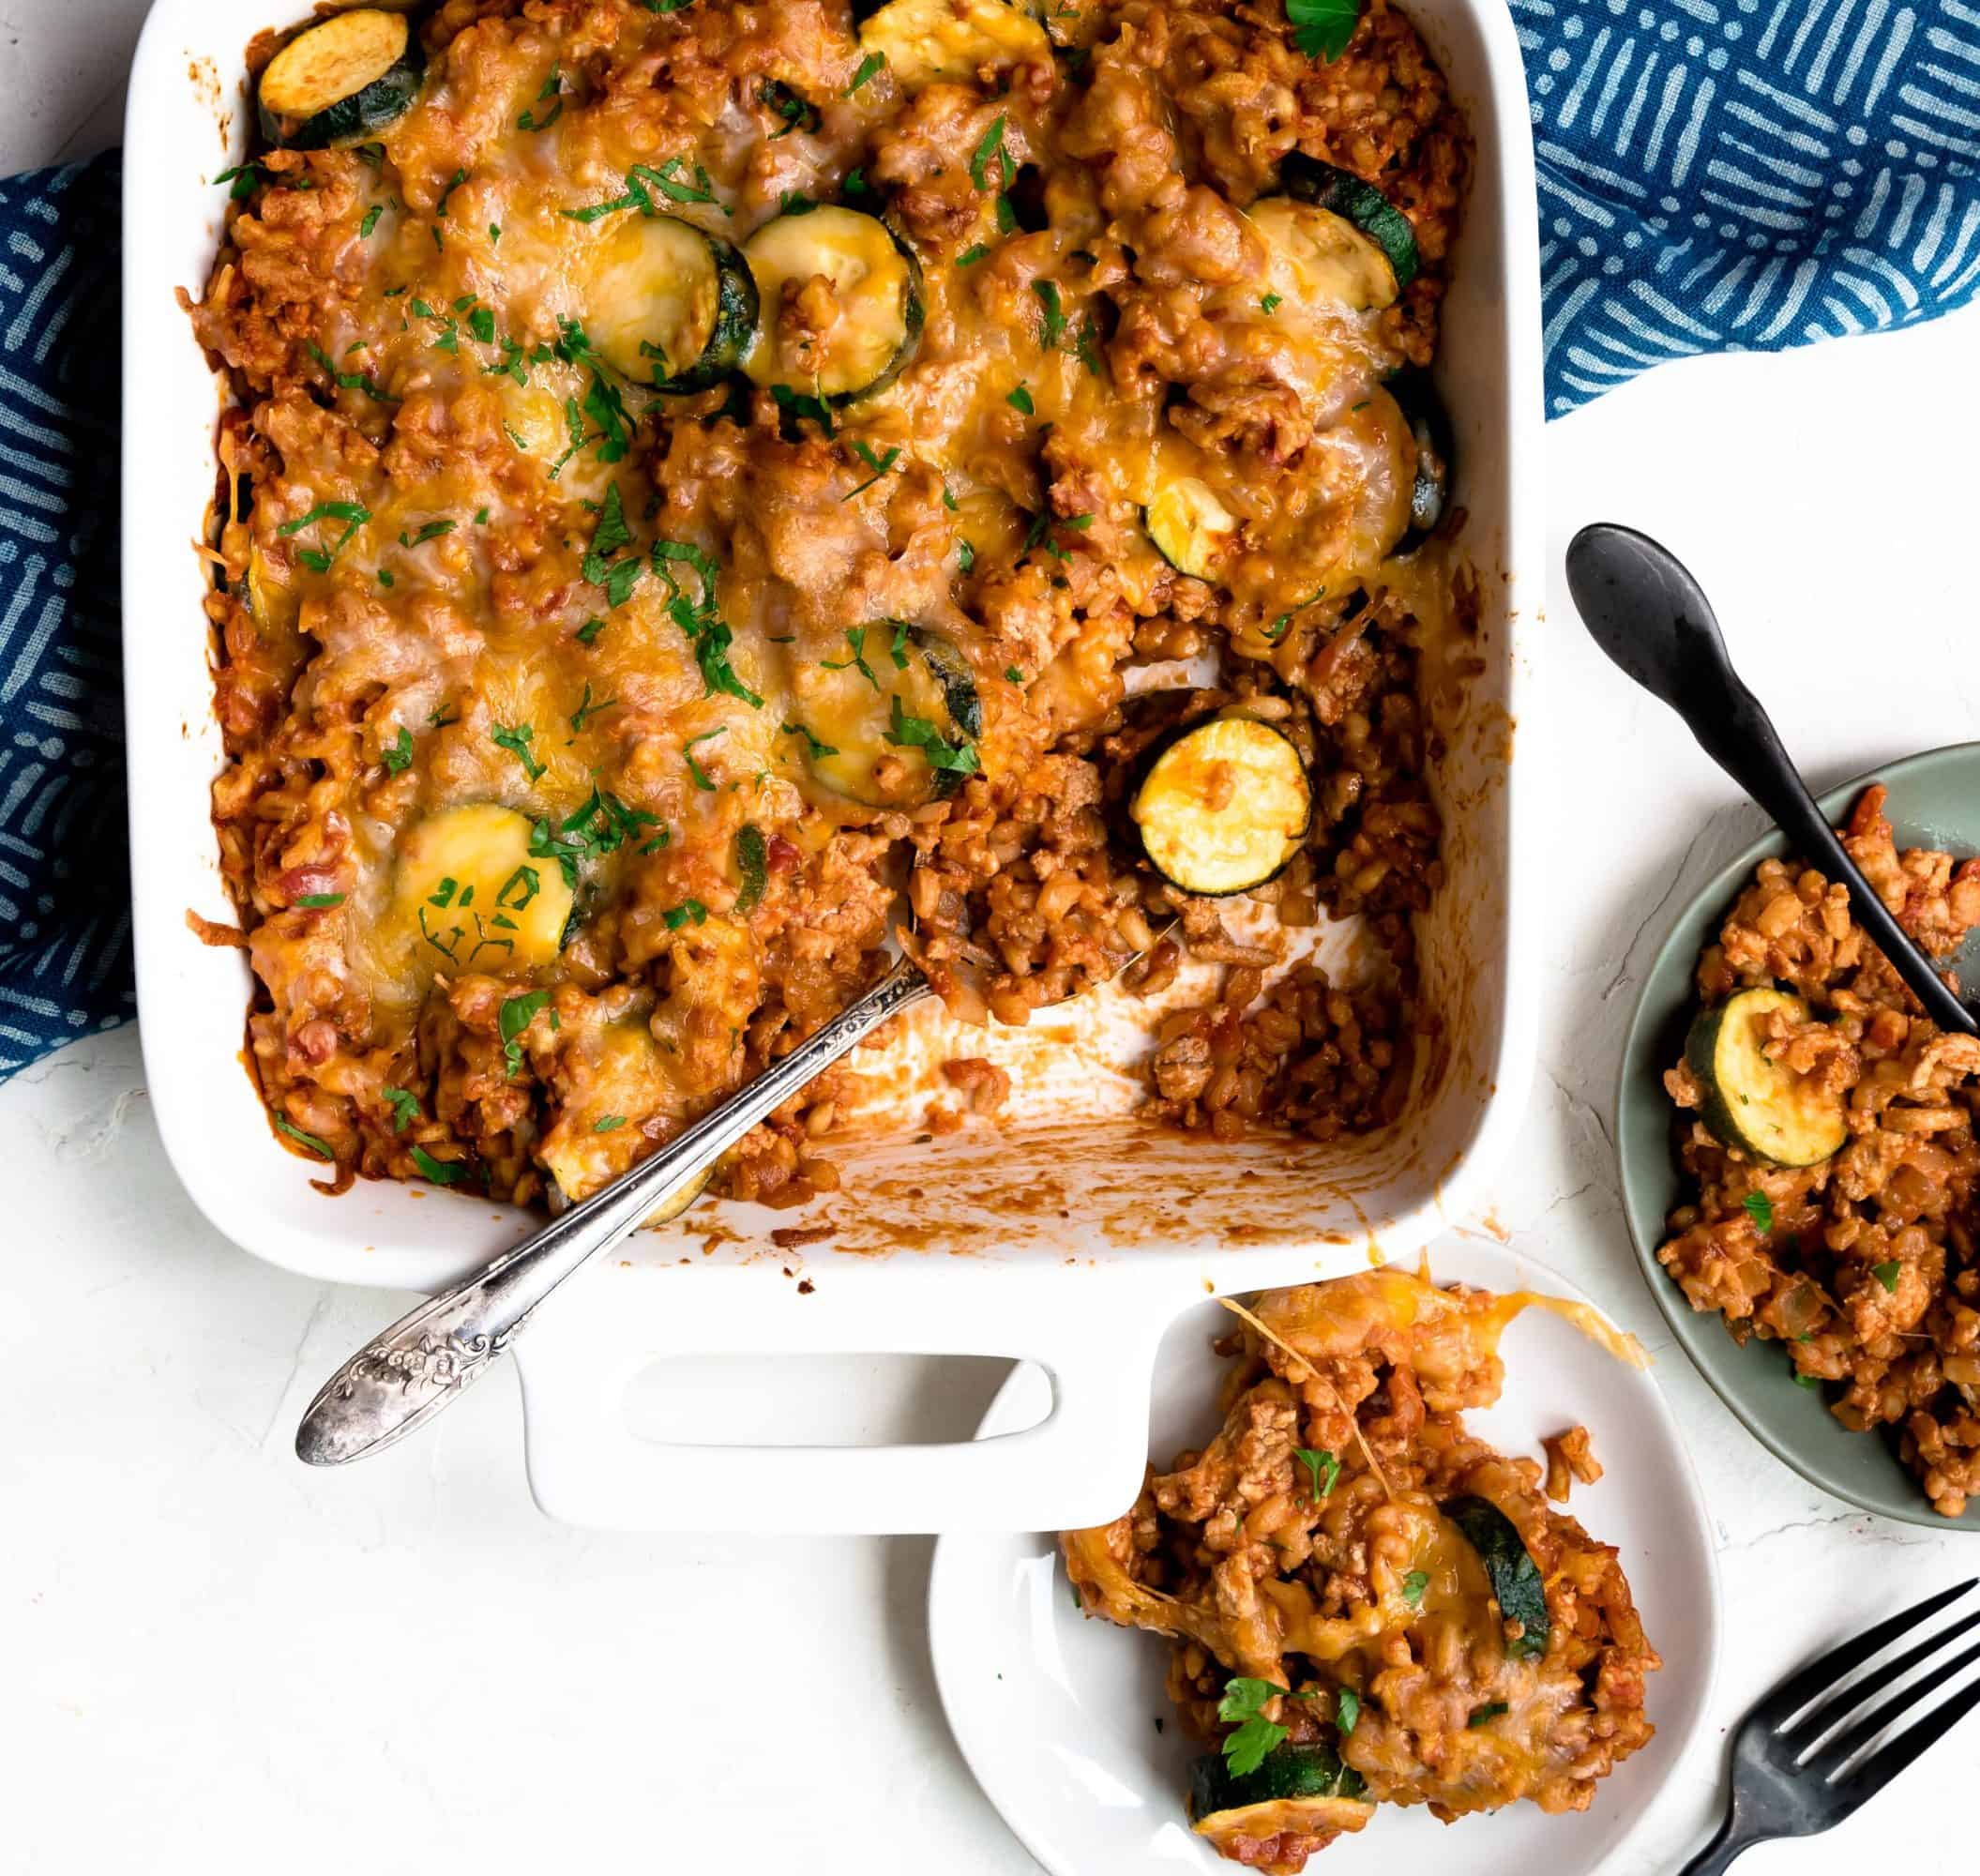 Make Ahead Cheesy Zucchini and Turkey Casserole in casserole dish with two serving plates